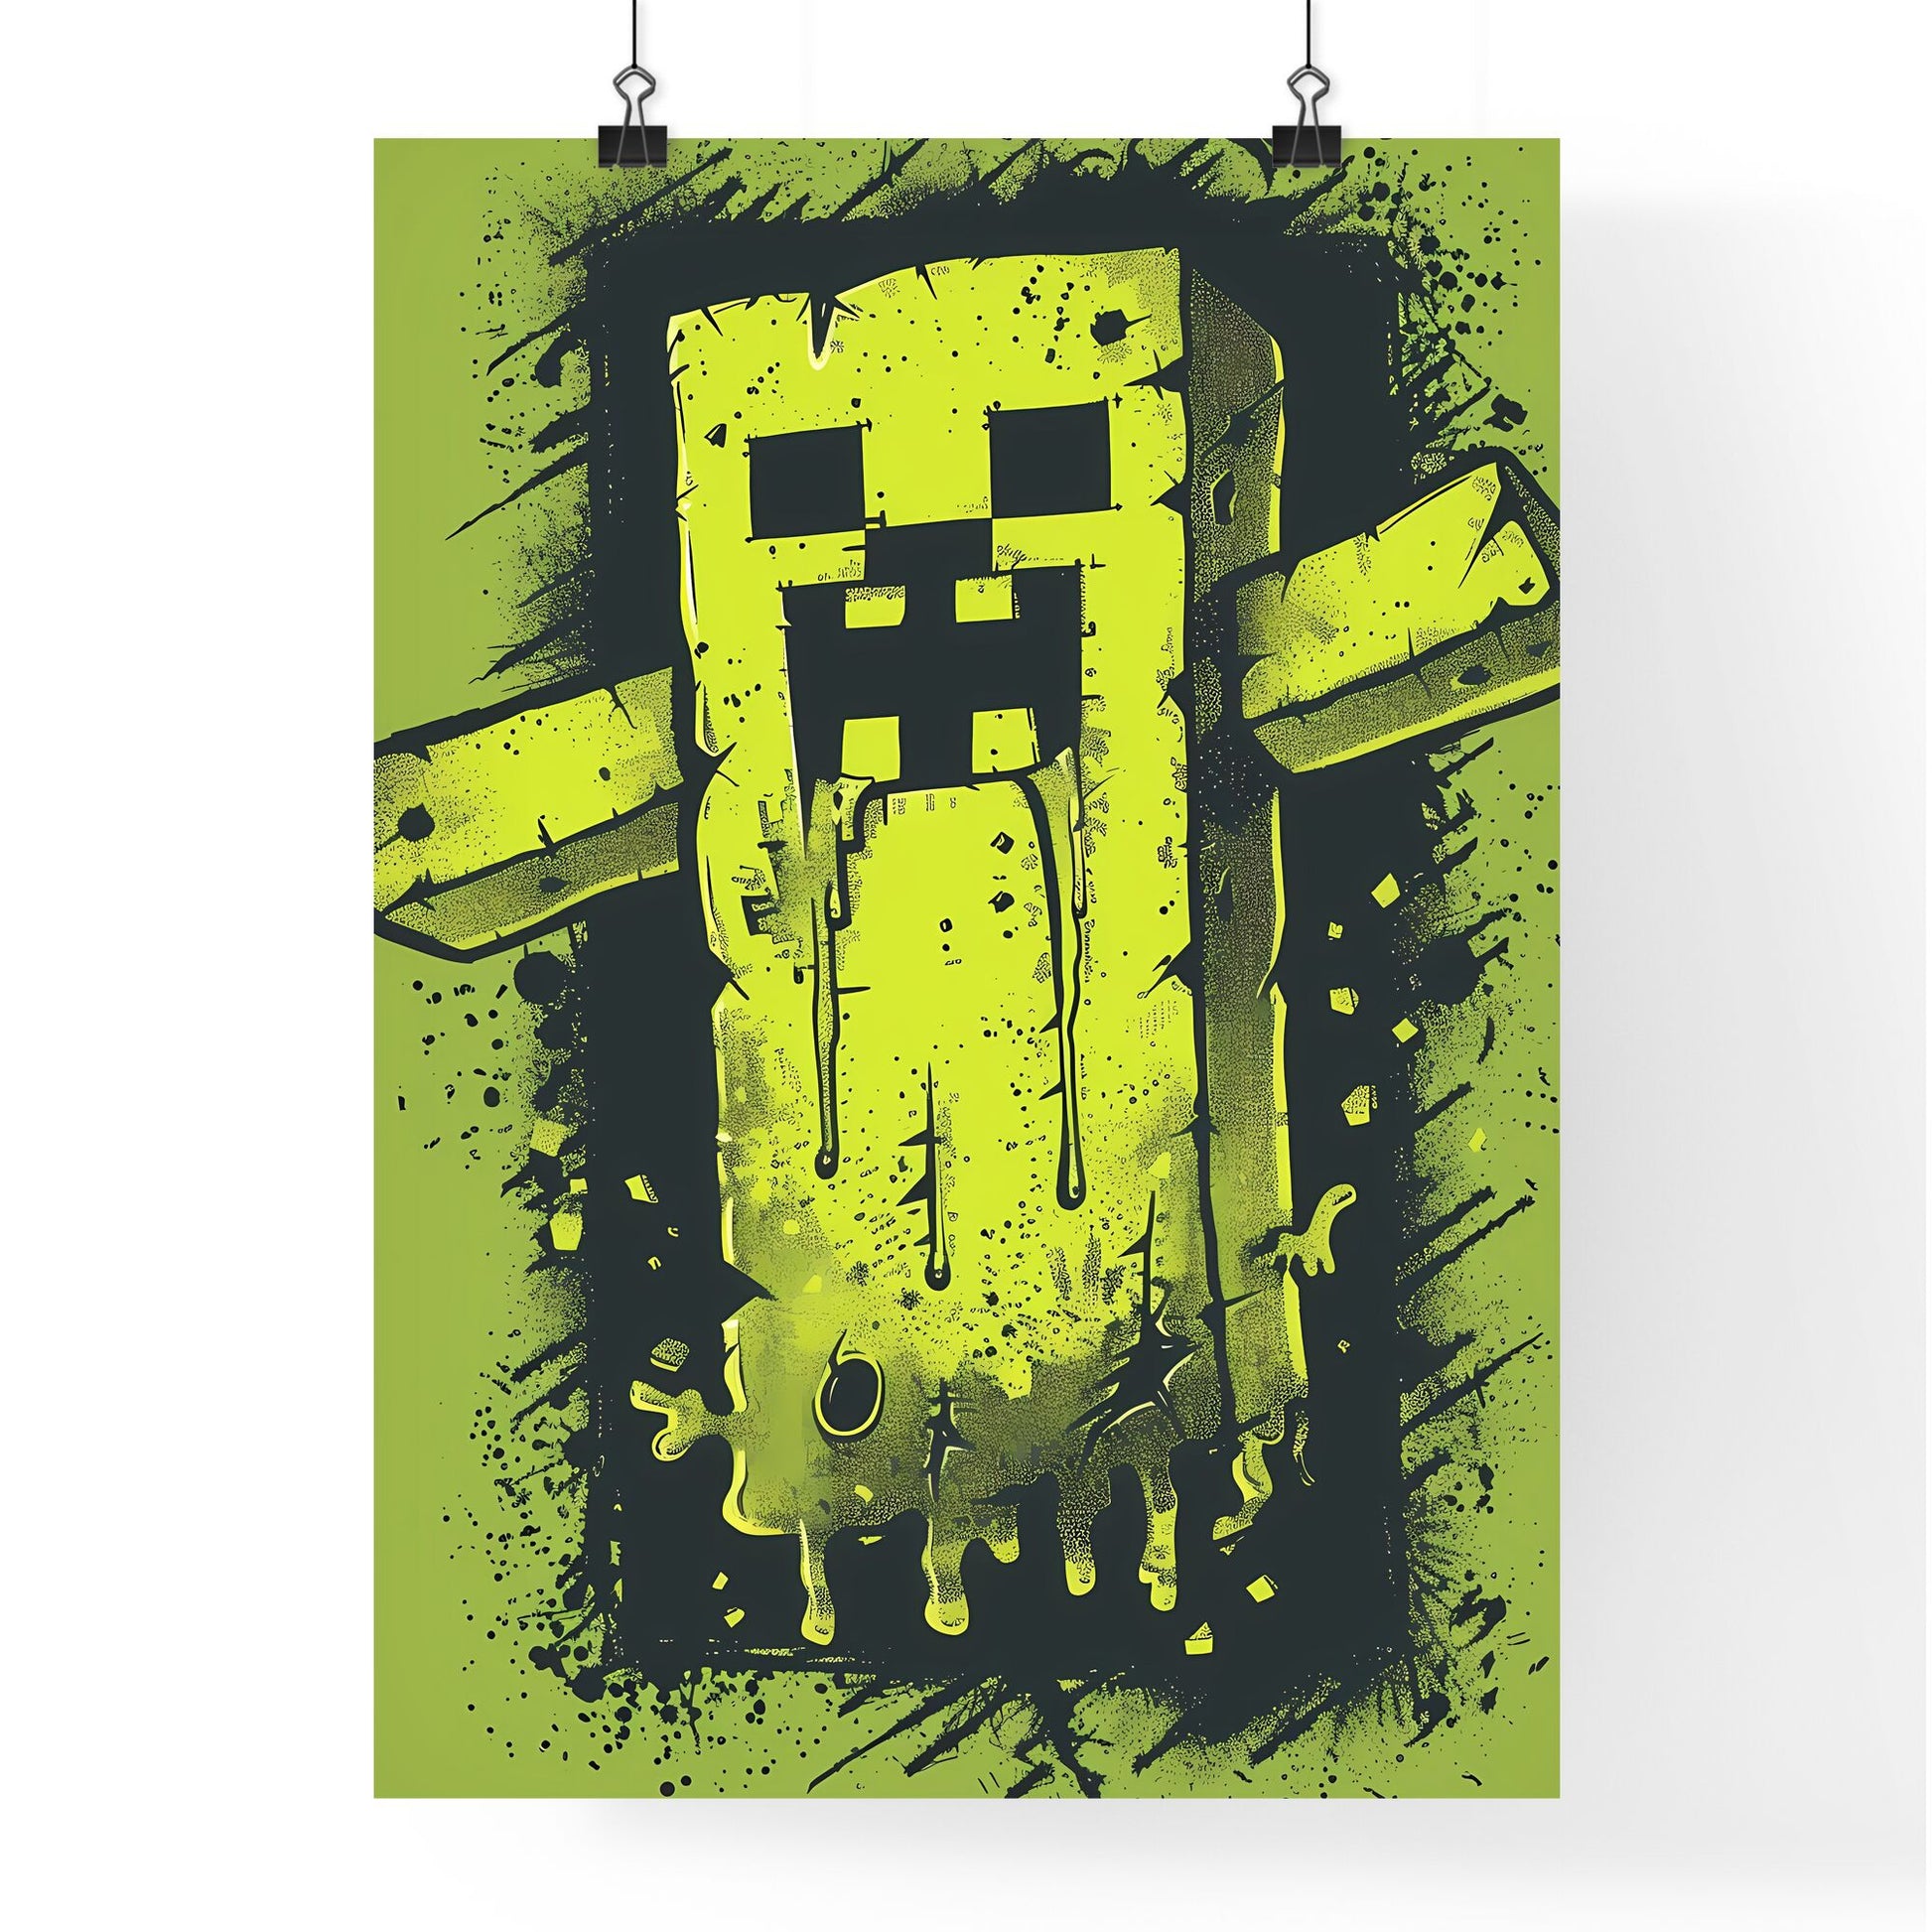 Vibrant Minecraft-Inspired Yellow Cartoon Character T-Shirt Logo Design in Gadgetpunk, Future Tech, Chromatic Style with Animated GIFs and Creepypasta Elements Default Title